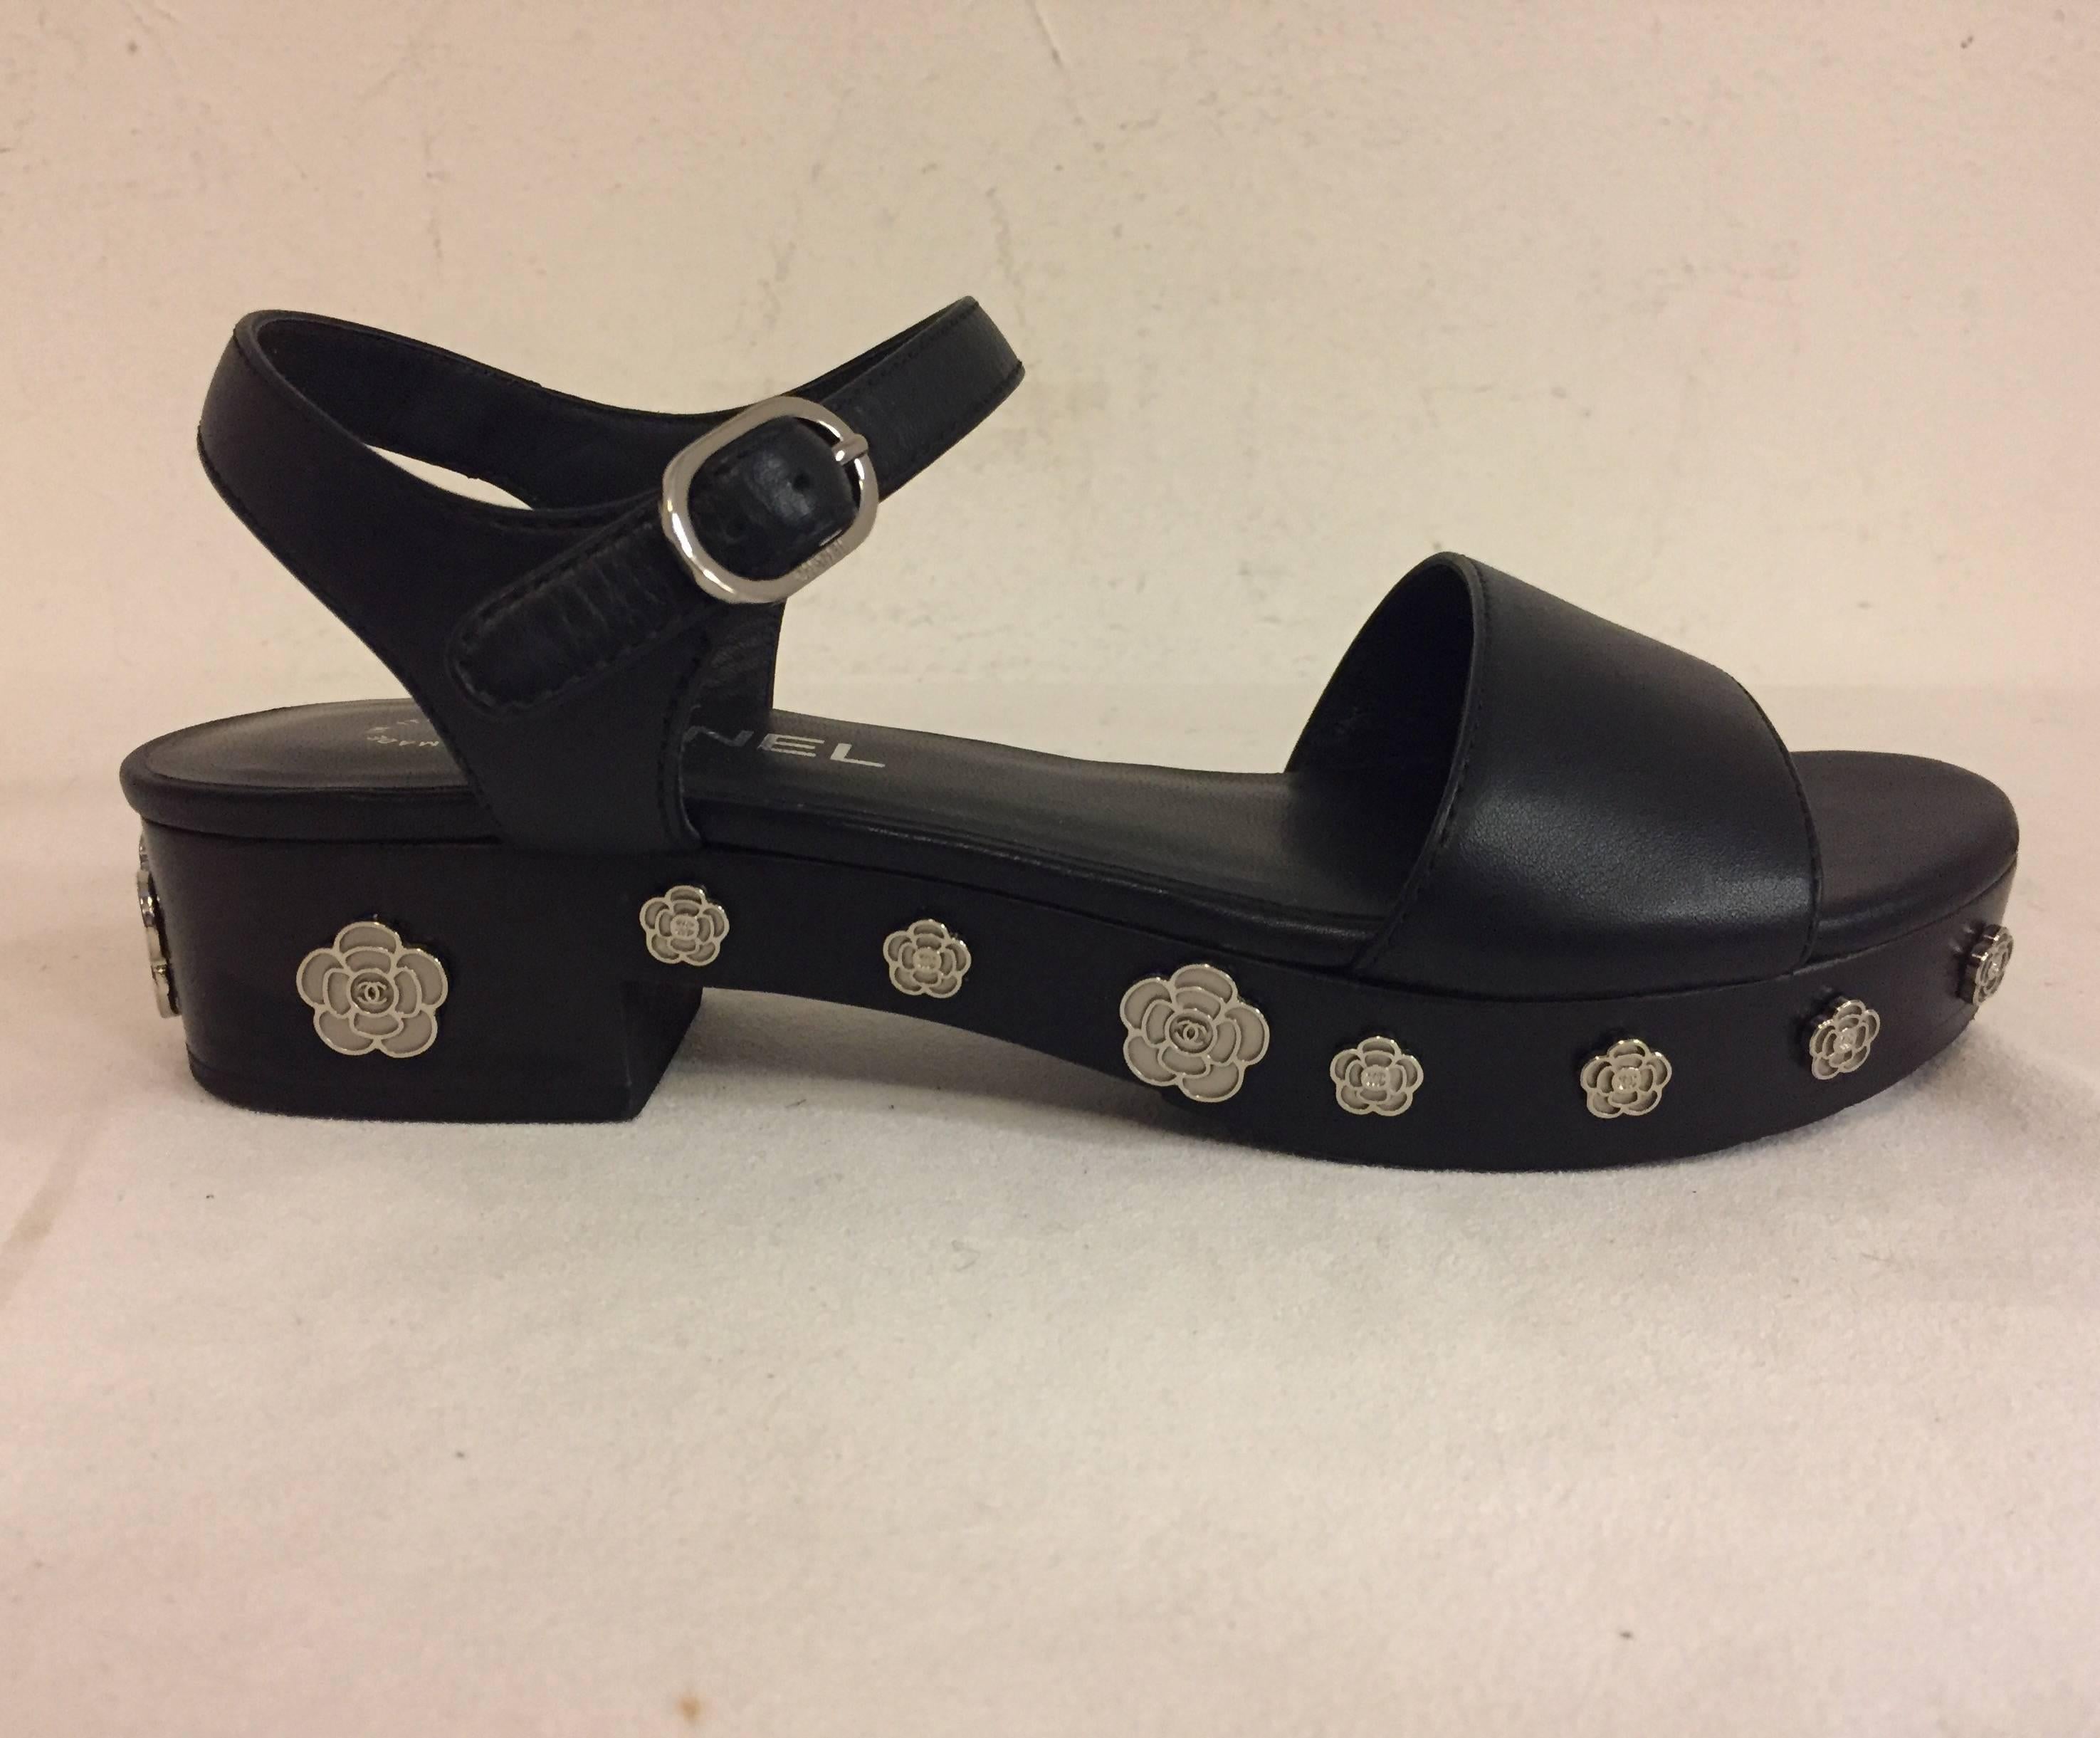 These creative Chanel sandals with platforms are simply crafted of calfskin leather in black.  The feature black wooden heel and platform lined with silver tone Camellia flowers.  The sandal has a wide single strap across the toes and an adjustable